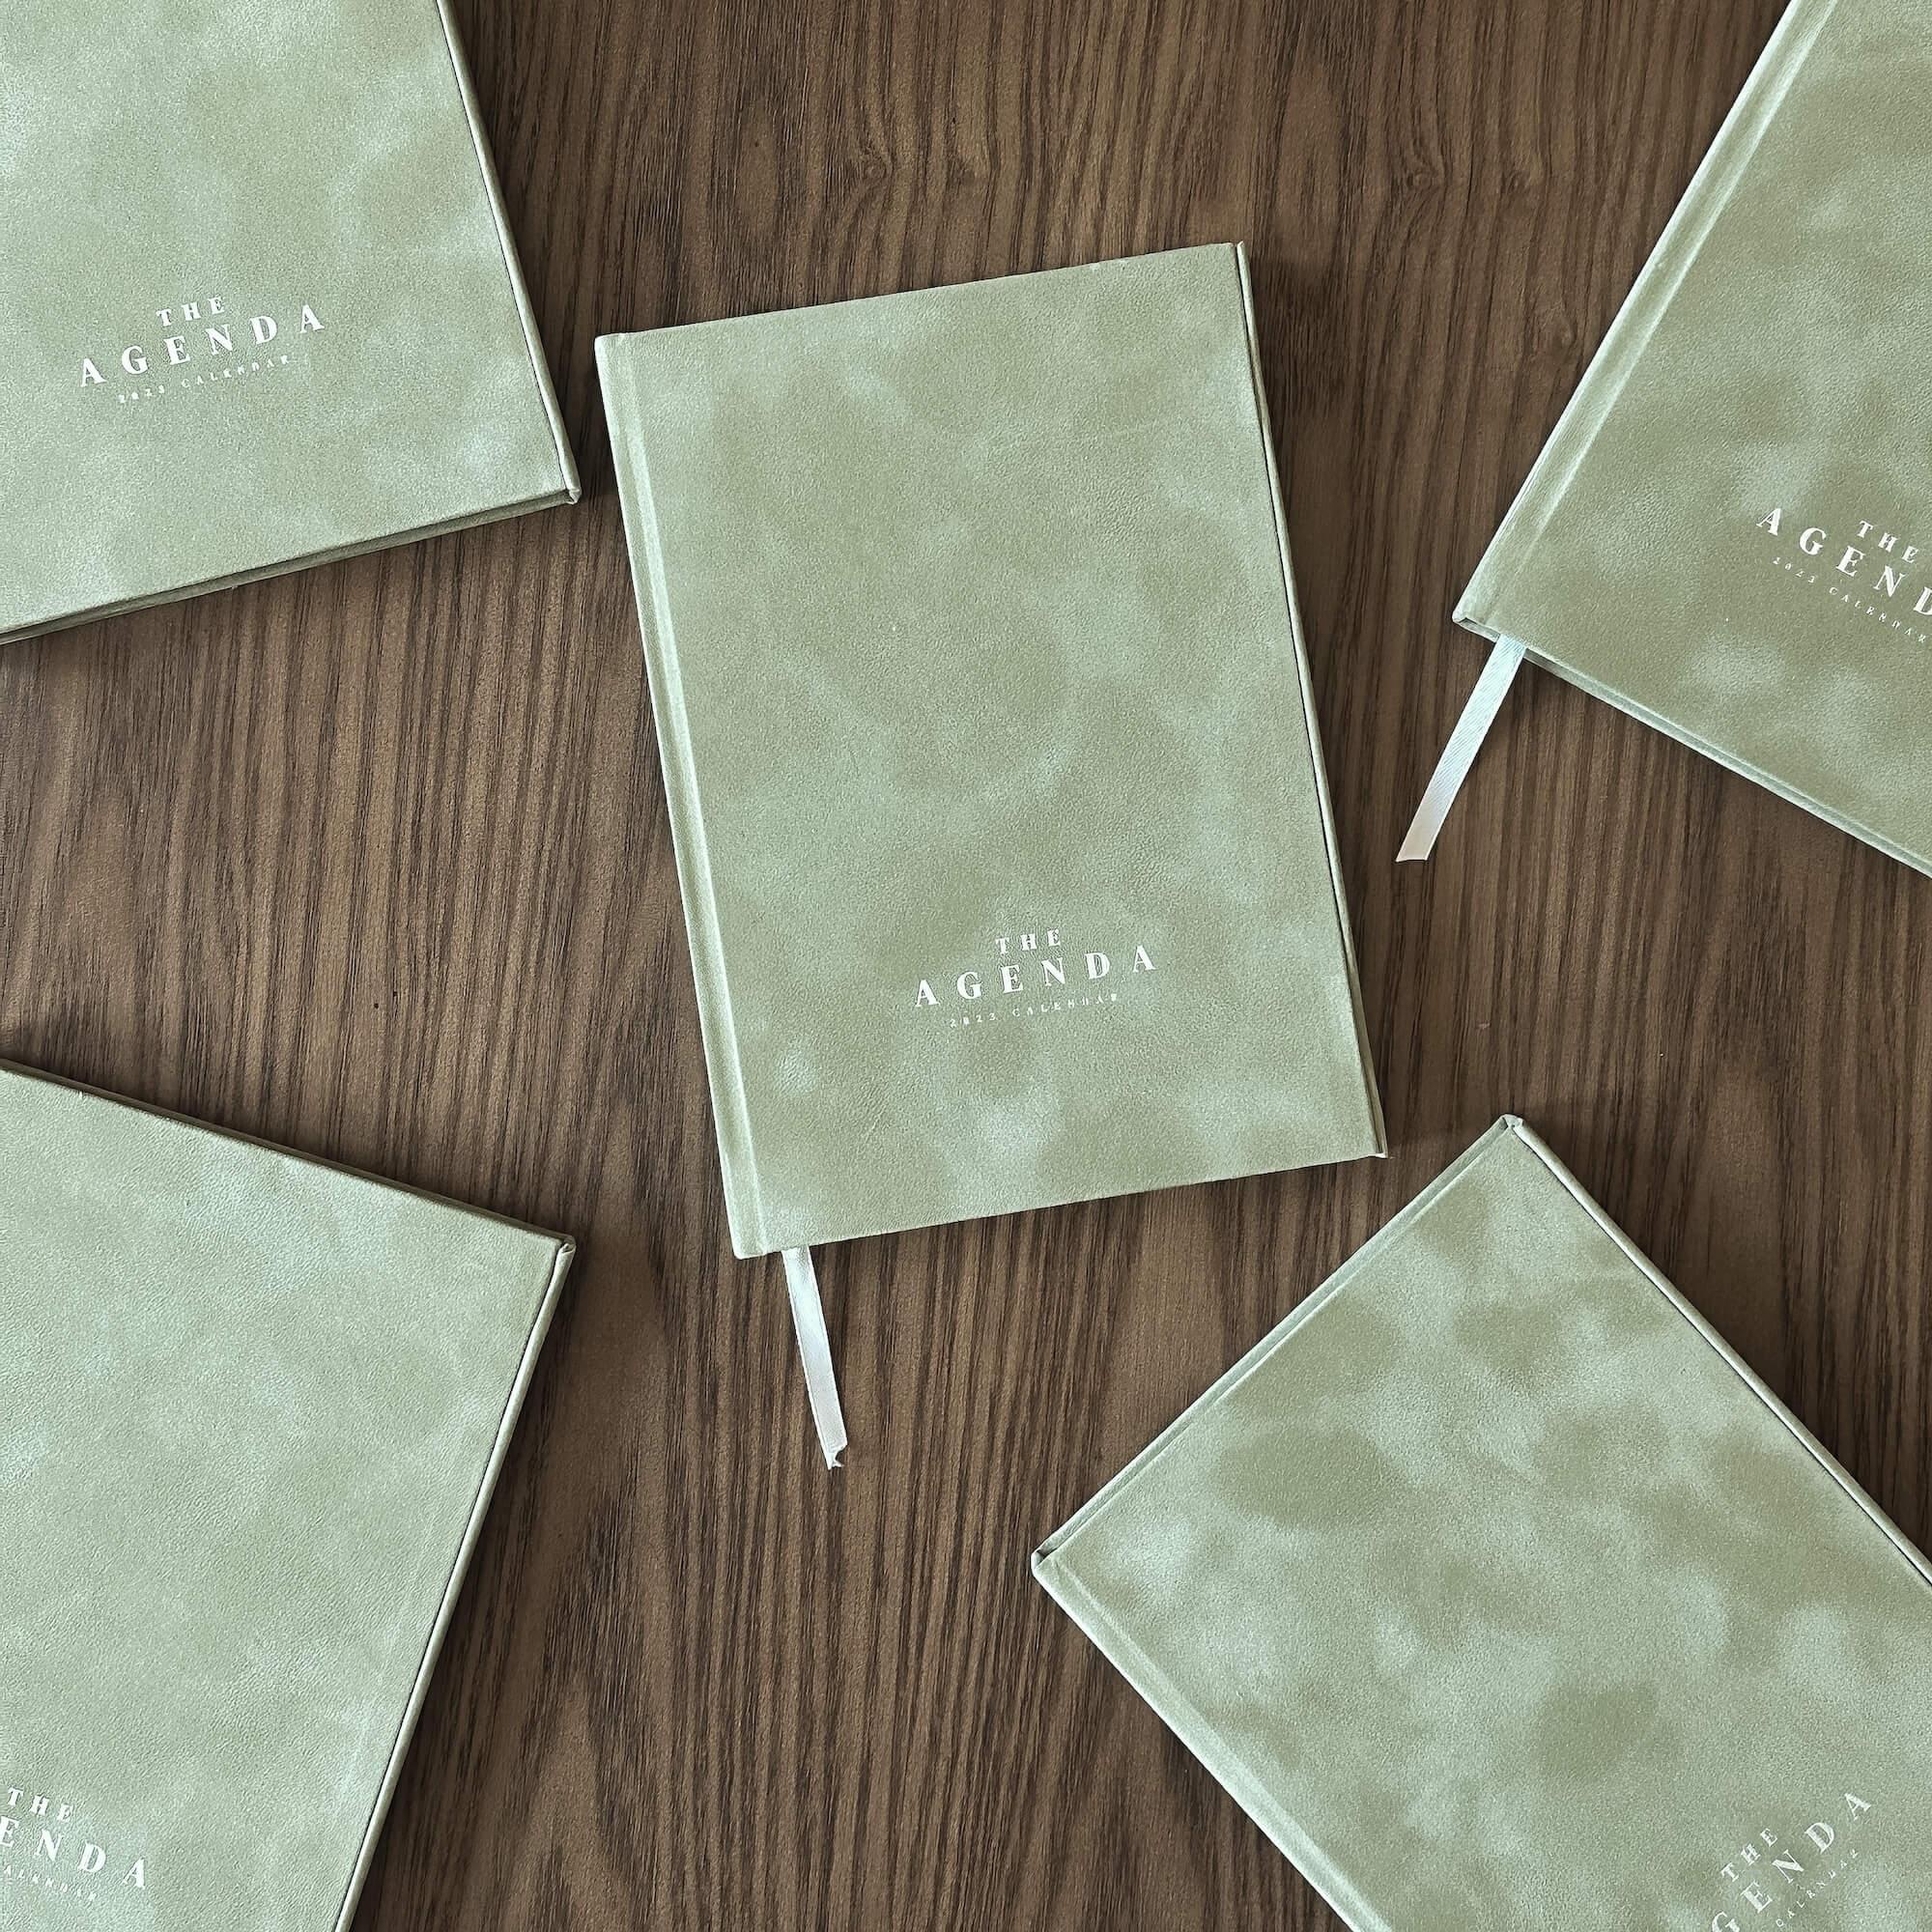 The Agenda uses a fully sustainable process to create stationery, from 100% recycled paper to solar-powered printers. Photo: The Agenda